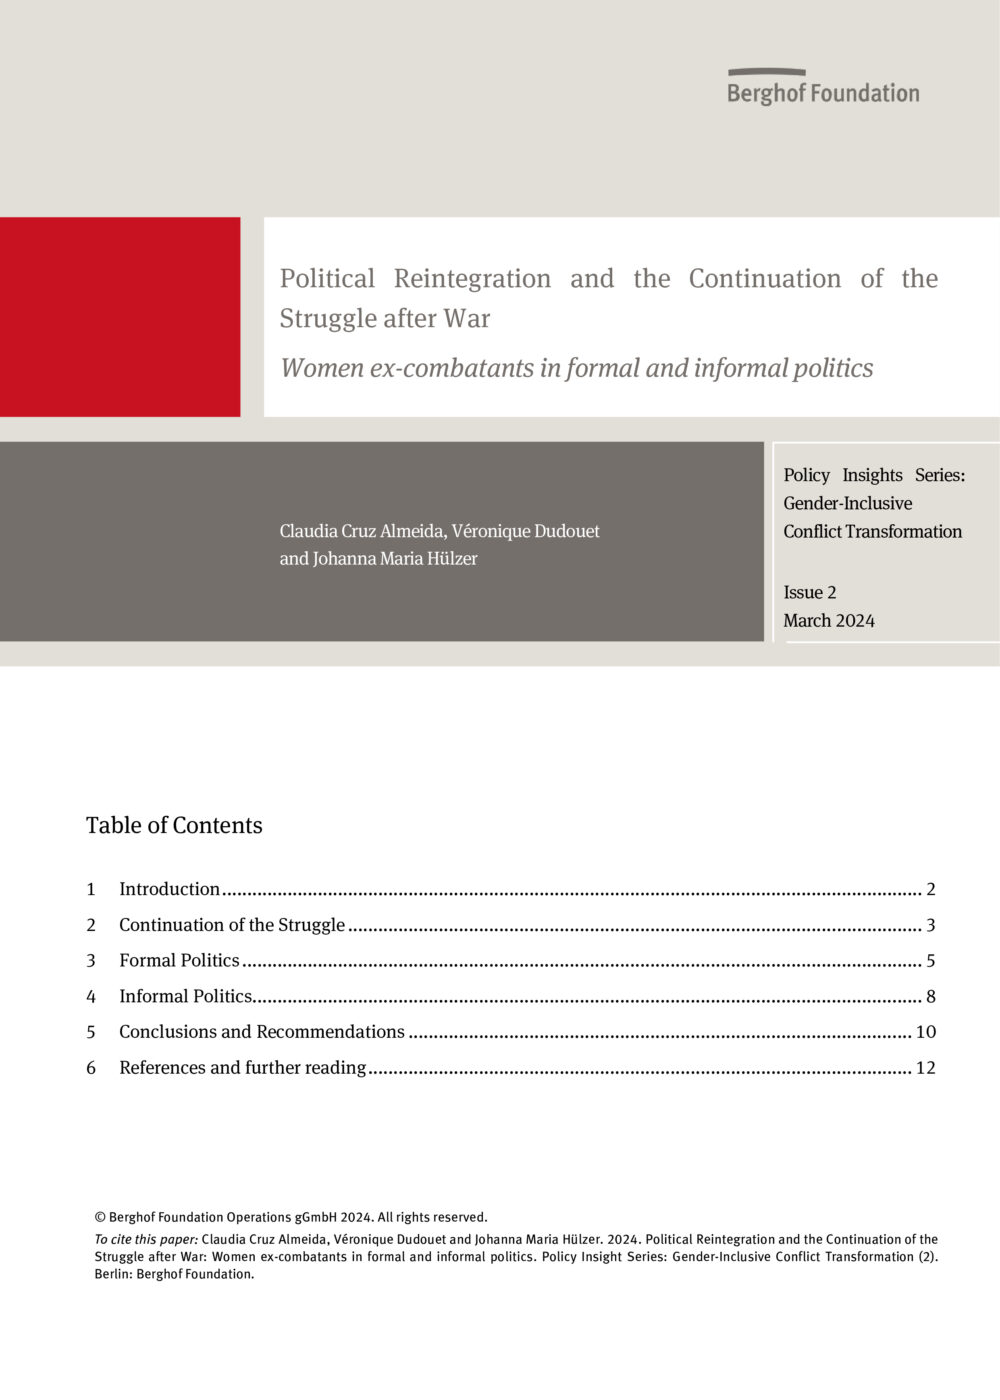 Cover Photo of Publication